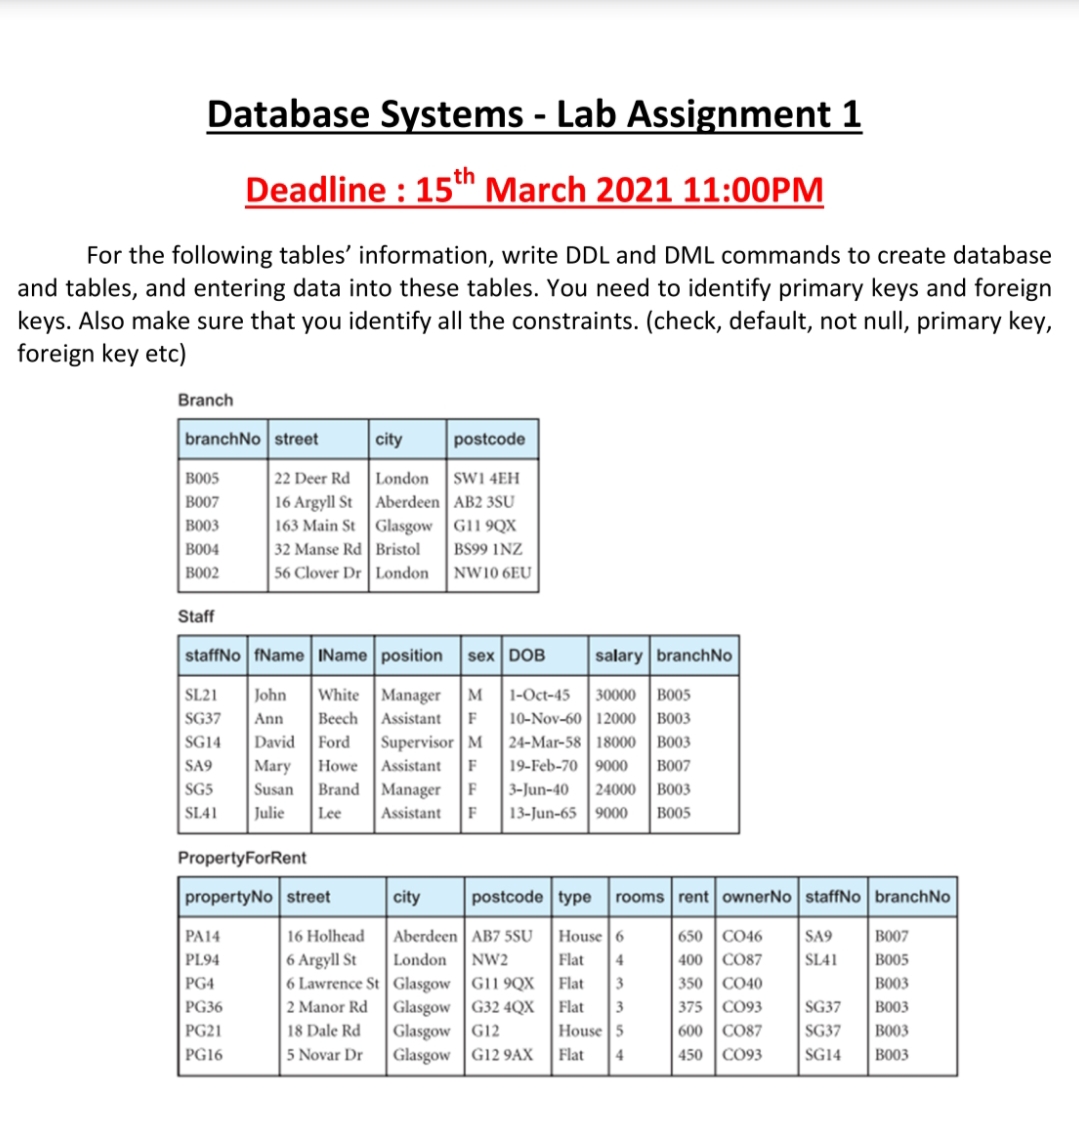 Database Systems - Lab Assignment 1
Deadline : 15th March 2021 11:00PM
For the following tables' information, write DDL and DML commands to create database
and tables, and entering data into these tables. You need to identify primary keys and foreign
keys. Also make sure that you identify all the constraints. (check, default, not null, primary key,
foreign key etc)
Branch
branchNo street
city
postcode
BO05
B007
BO03
BO04
22 Deer Rd
16 Argyll St Aberdeen AB2 3SU
163 Main St Glasgow |G119QX
32 Manse Rd Bristol
56 Clover Dr London
London
SWI 4EH
BS99 1NZ
BO02
NW10 6EU|
Staff
staffNo fName IName position
sex DOB
salary branchNo
30000 BO05
| 10-Nov-60 12000 |BO03
24-Mar-58 18000
19-Feb-70 | 9000
SL21
John
White
Manager
M
1-Oct-45
SG37
Ann
Beech
Assistant
F
SG14
David
Ford
Supervisor M
BO03
SA9
Mary
Howe
Assistant
F
BO07
Brand Manager
3-Jun-40
13-Jun-65 9000
SG5
Susan
F
24000 BO03
SL41
Julie
Lee
Assistant
F
BO05
PropertyForRent
propertyNo street
city
postcode type
rooms rent ownerNo staffNo branchNo
Aberdeen AB7 5SU
London
6 Lawrence St Glasgow |G11 9QX
Glasgow G32 4QX
Glasgow G12
Glasgow |G12 9AX
650 |CO46
400 CO87
350 CO40
375 CO93
600 |CO87
PA14
16 Holhead
House 6
SA9
BO07
PL94
6 Argyll St
NW2
Flat
4
SL41
B005
PG4
Flat
3
BO03
PG36
2 Manor Rd
Flat
3
SG37
BO03
PG21
18 Dale Rd
House 5
SG37
BO03
PG16
5 Novar Dr
Flat
4
450
CO93
SG14
BO03
